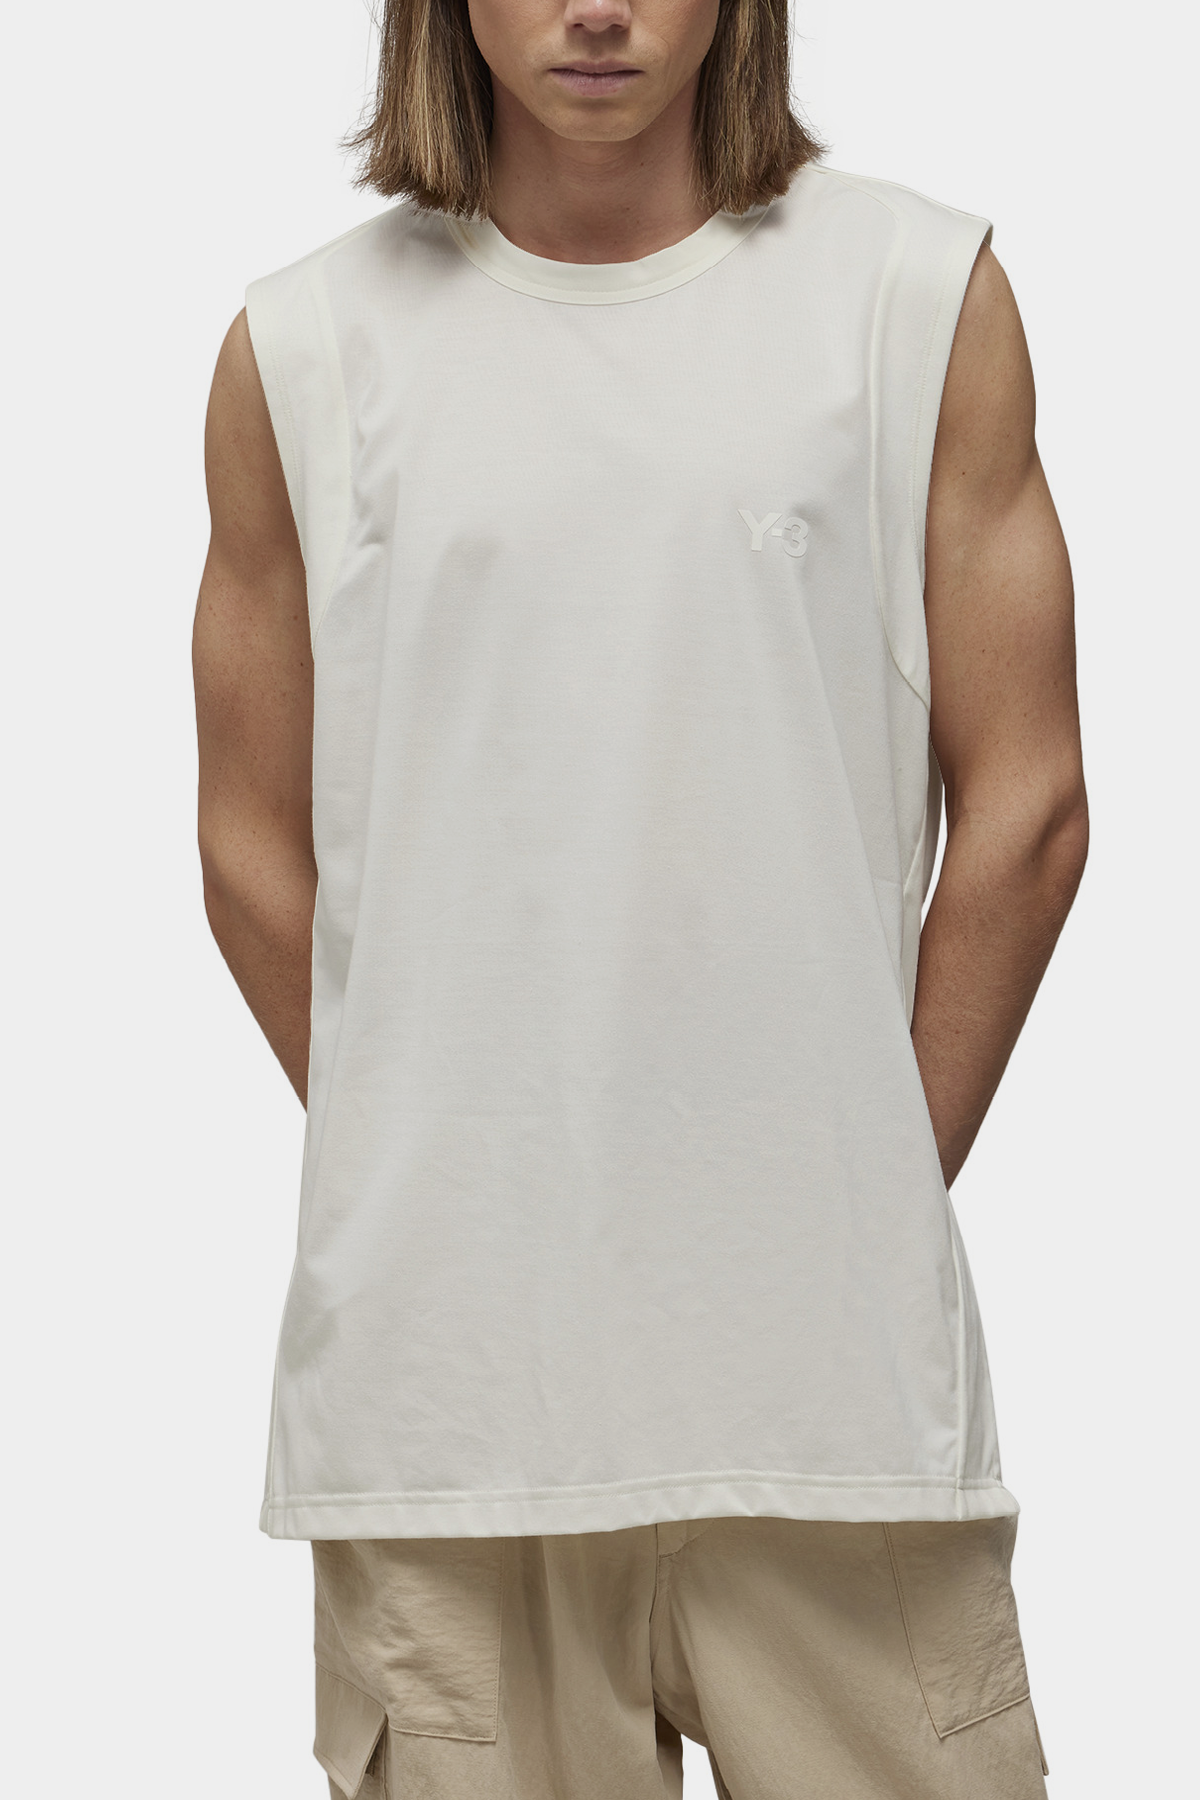 Y-3 Tank Top - Off White - Due West